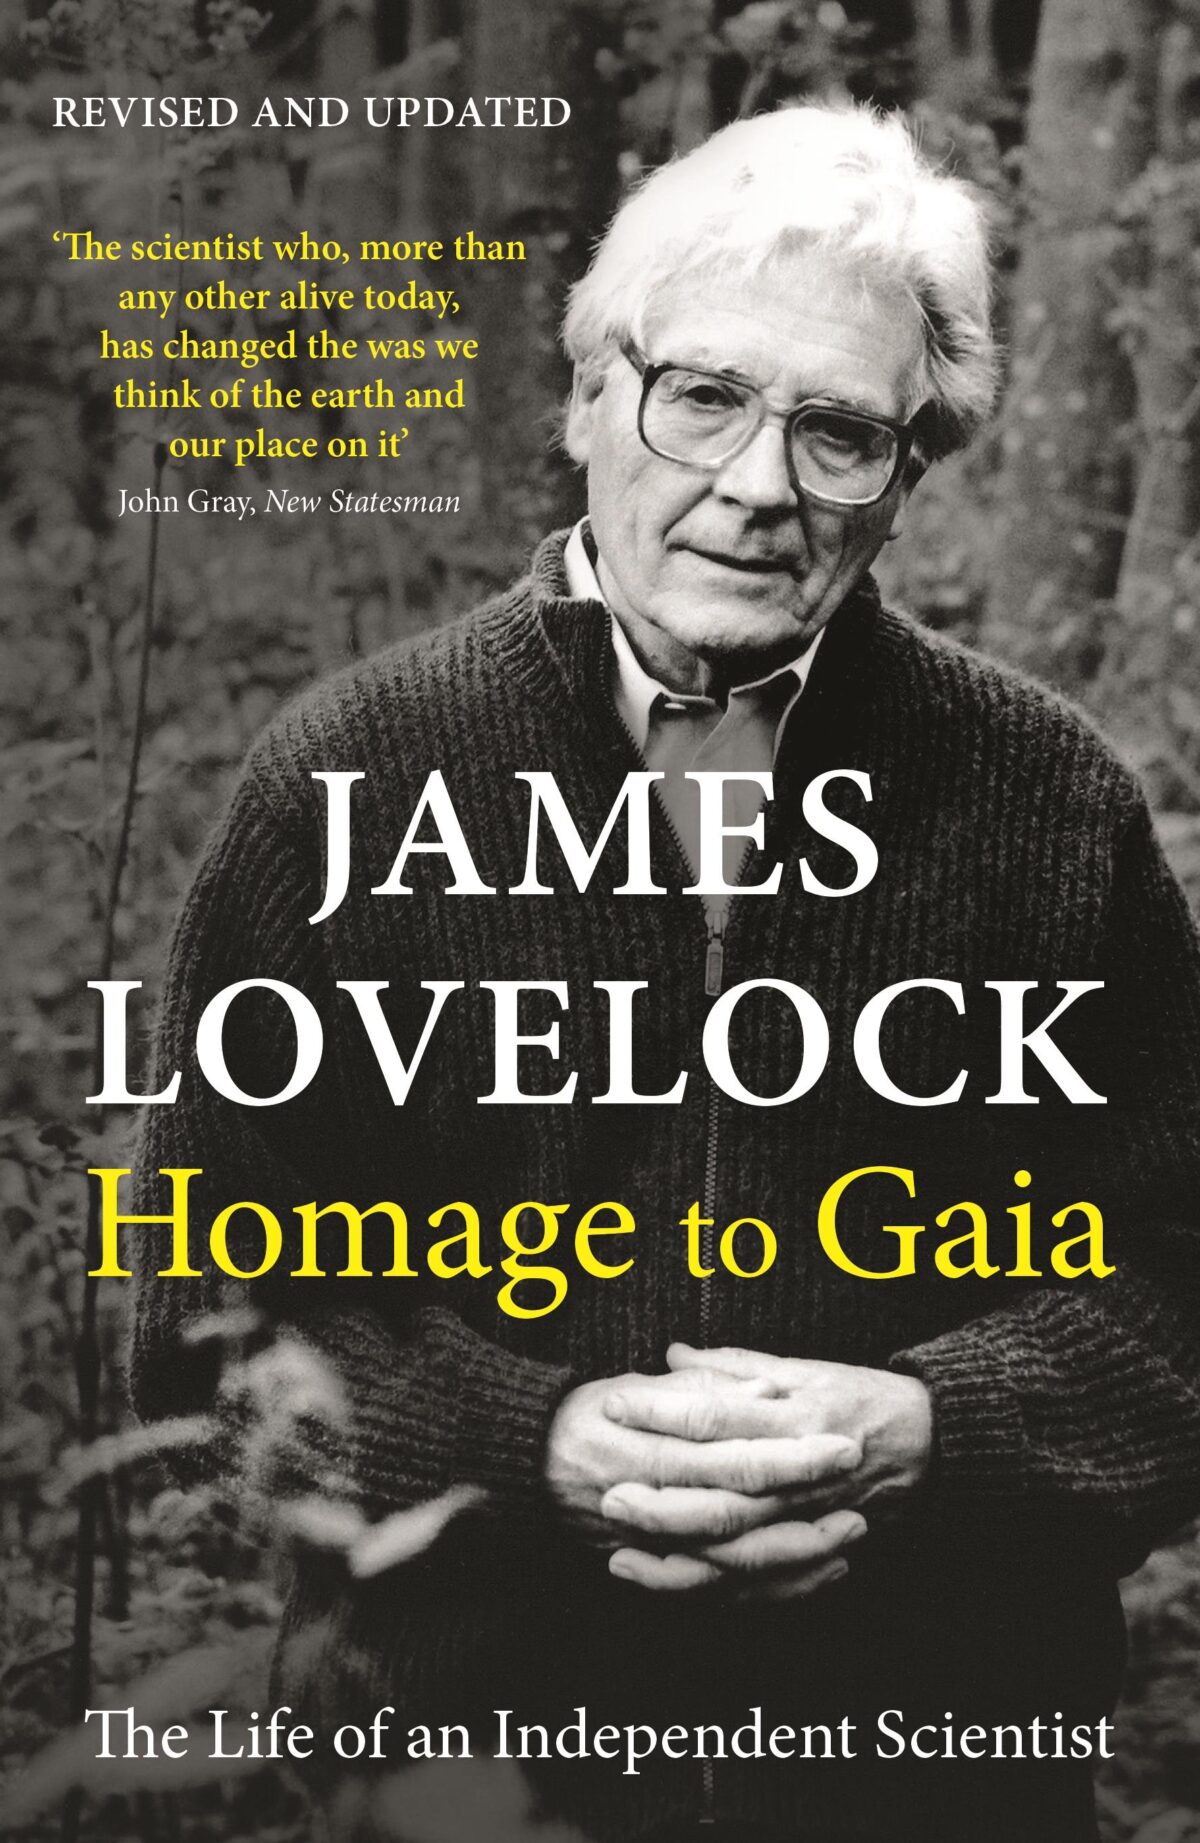 James Lovelock : Living Life On Your Own Terms